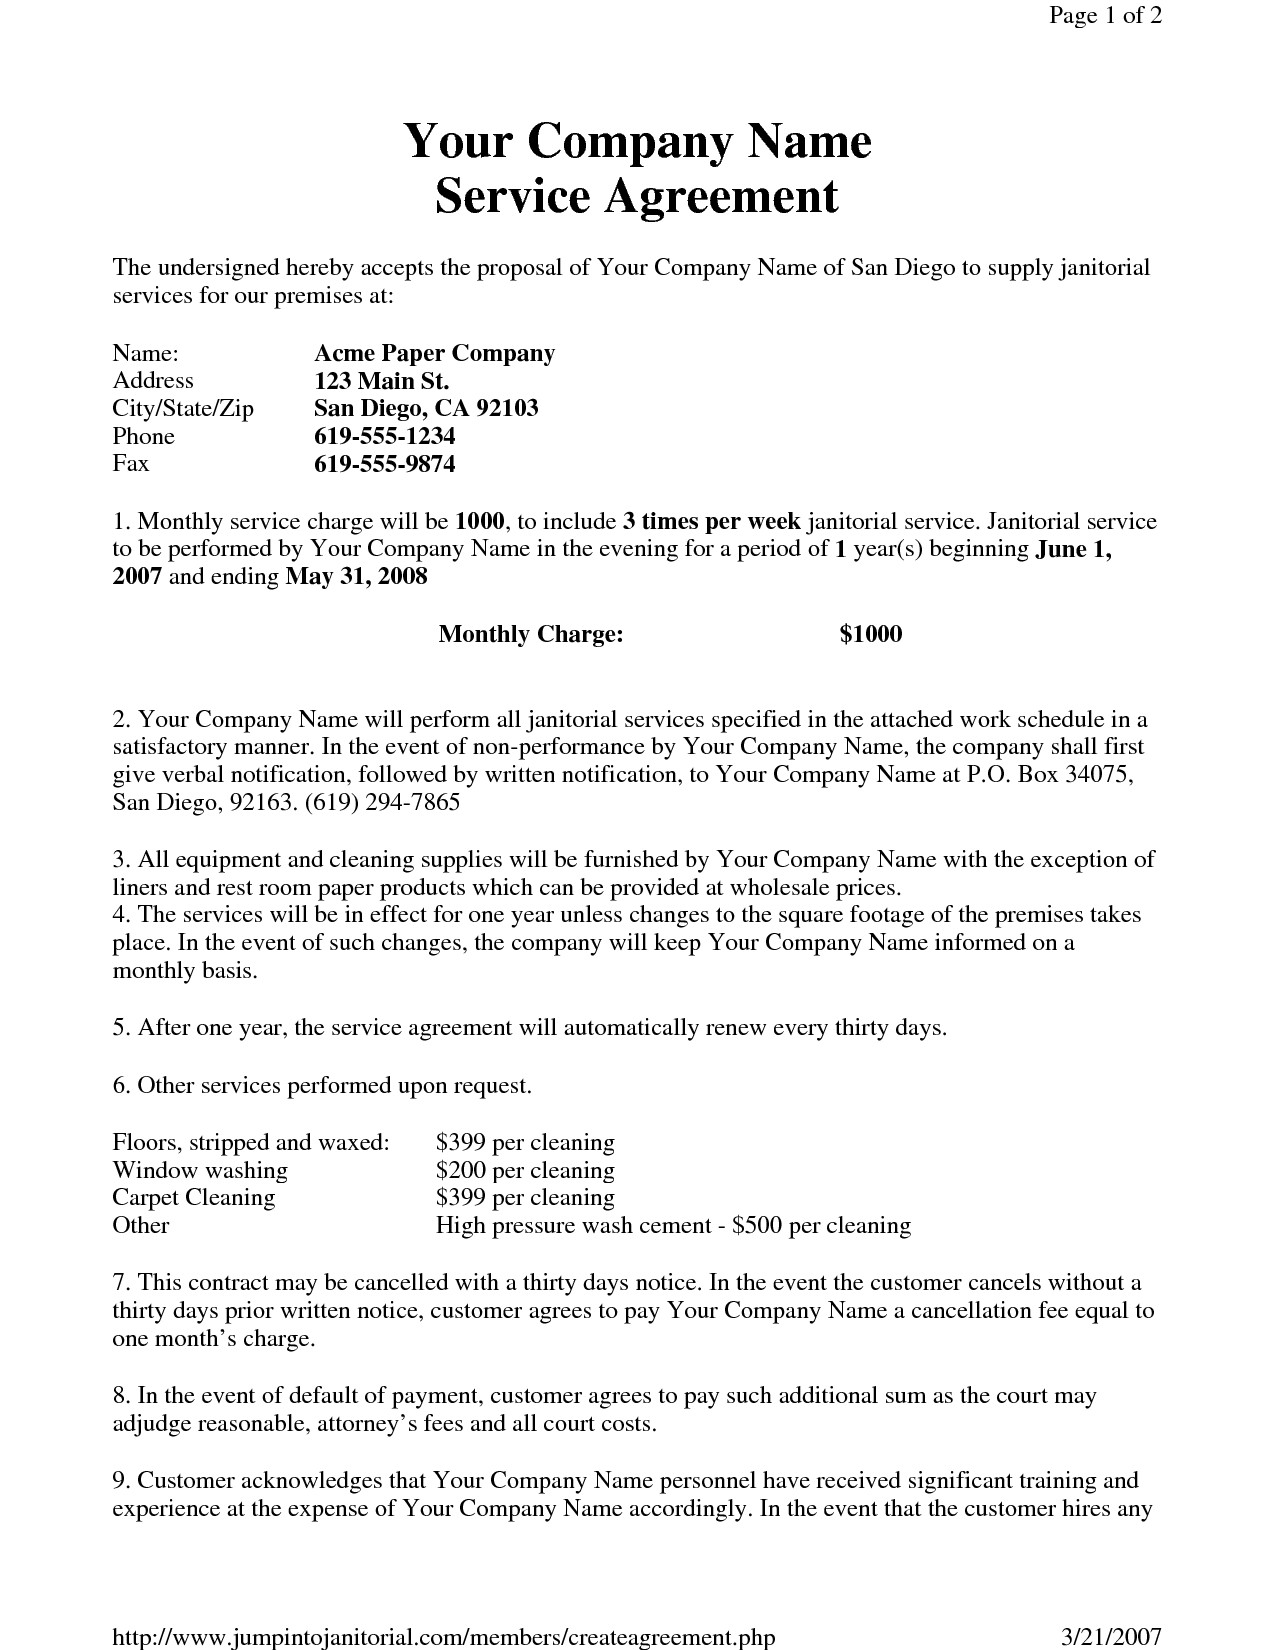 Janitorial Service Agreement By Hgh19249 Sample Document Contracts Templates